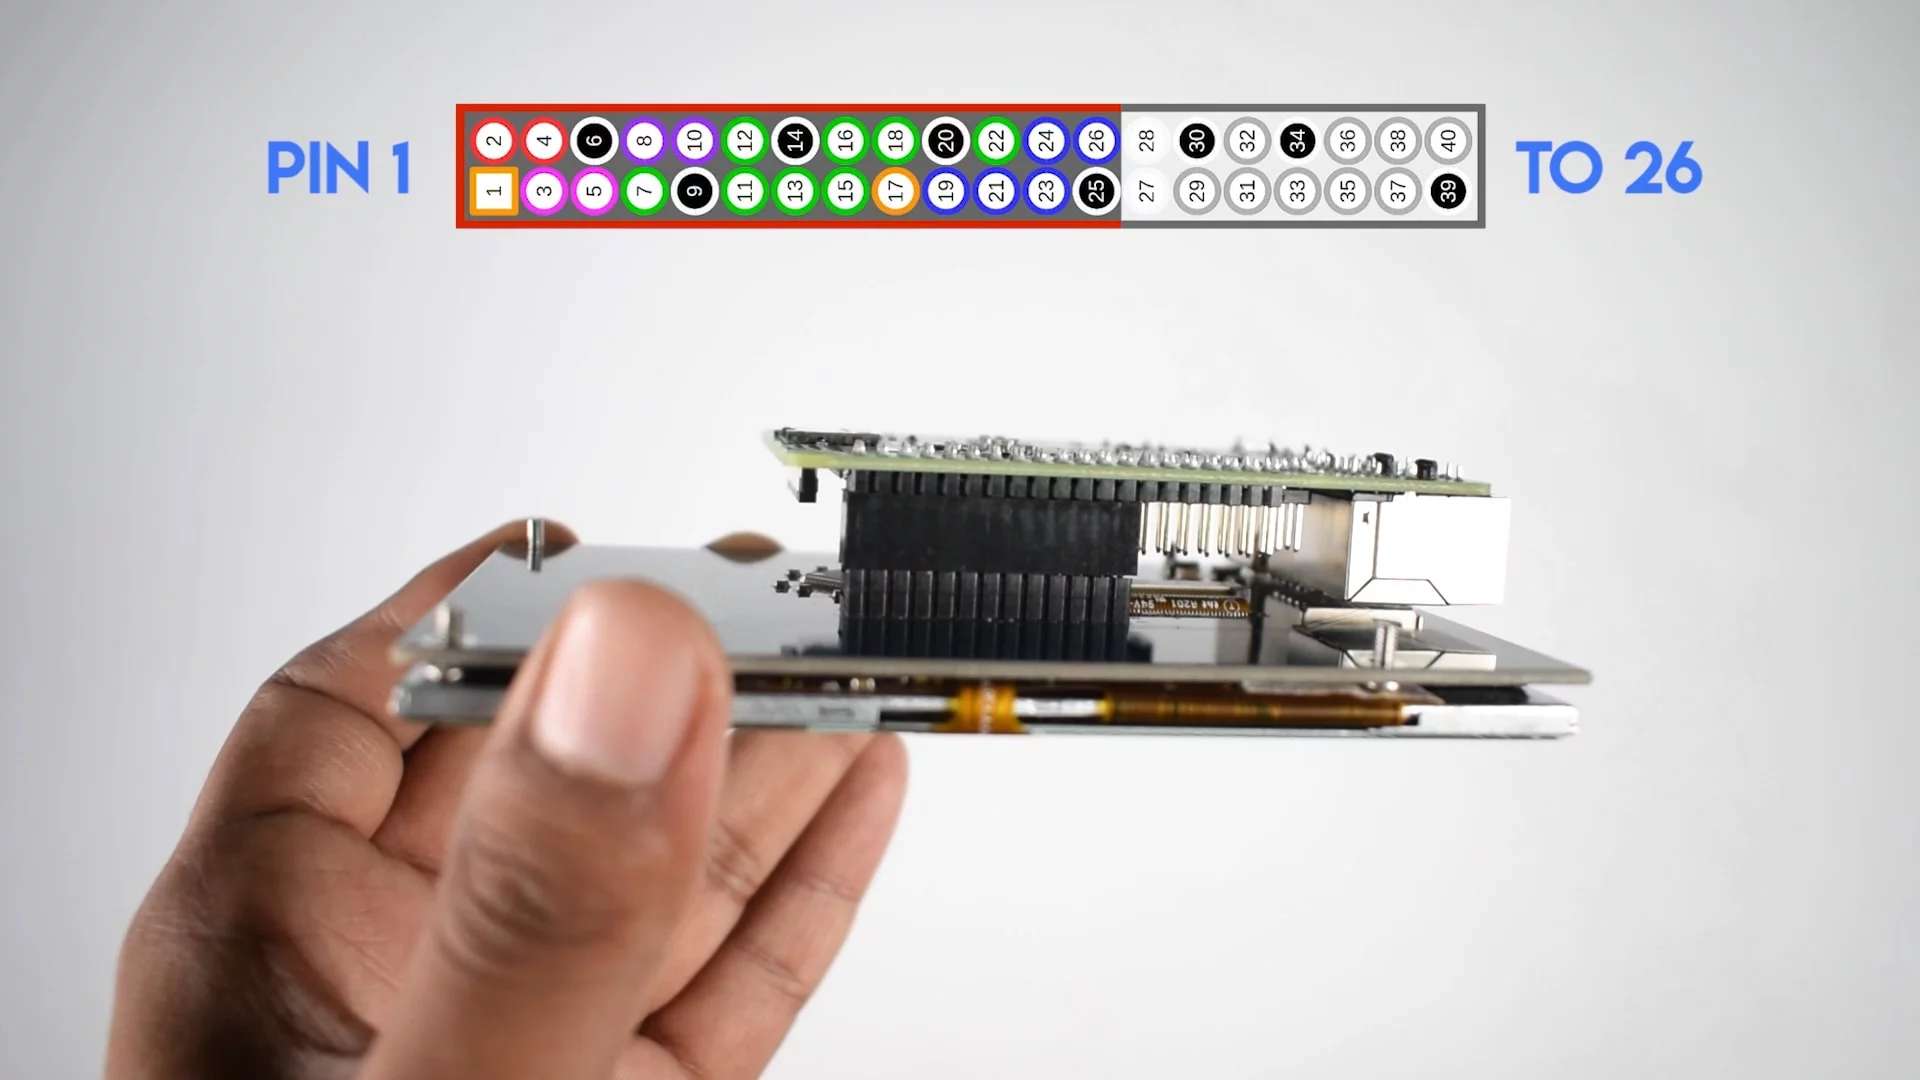 How to connect 5 inch touchscreen on gpio pins